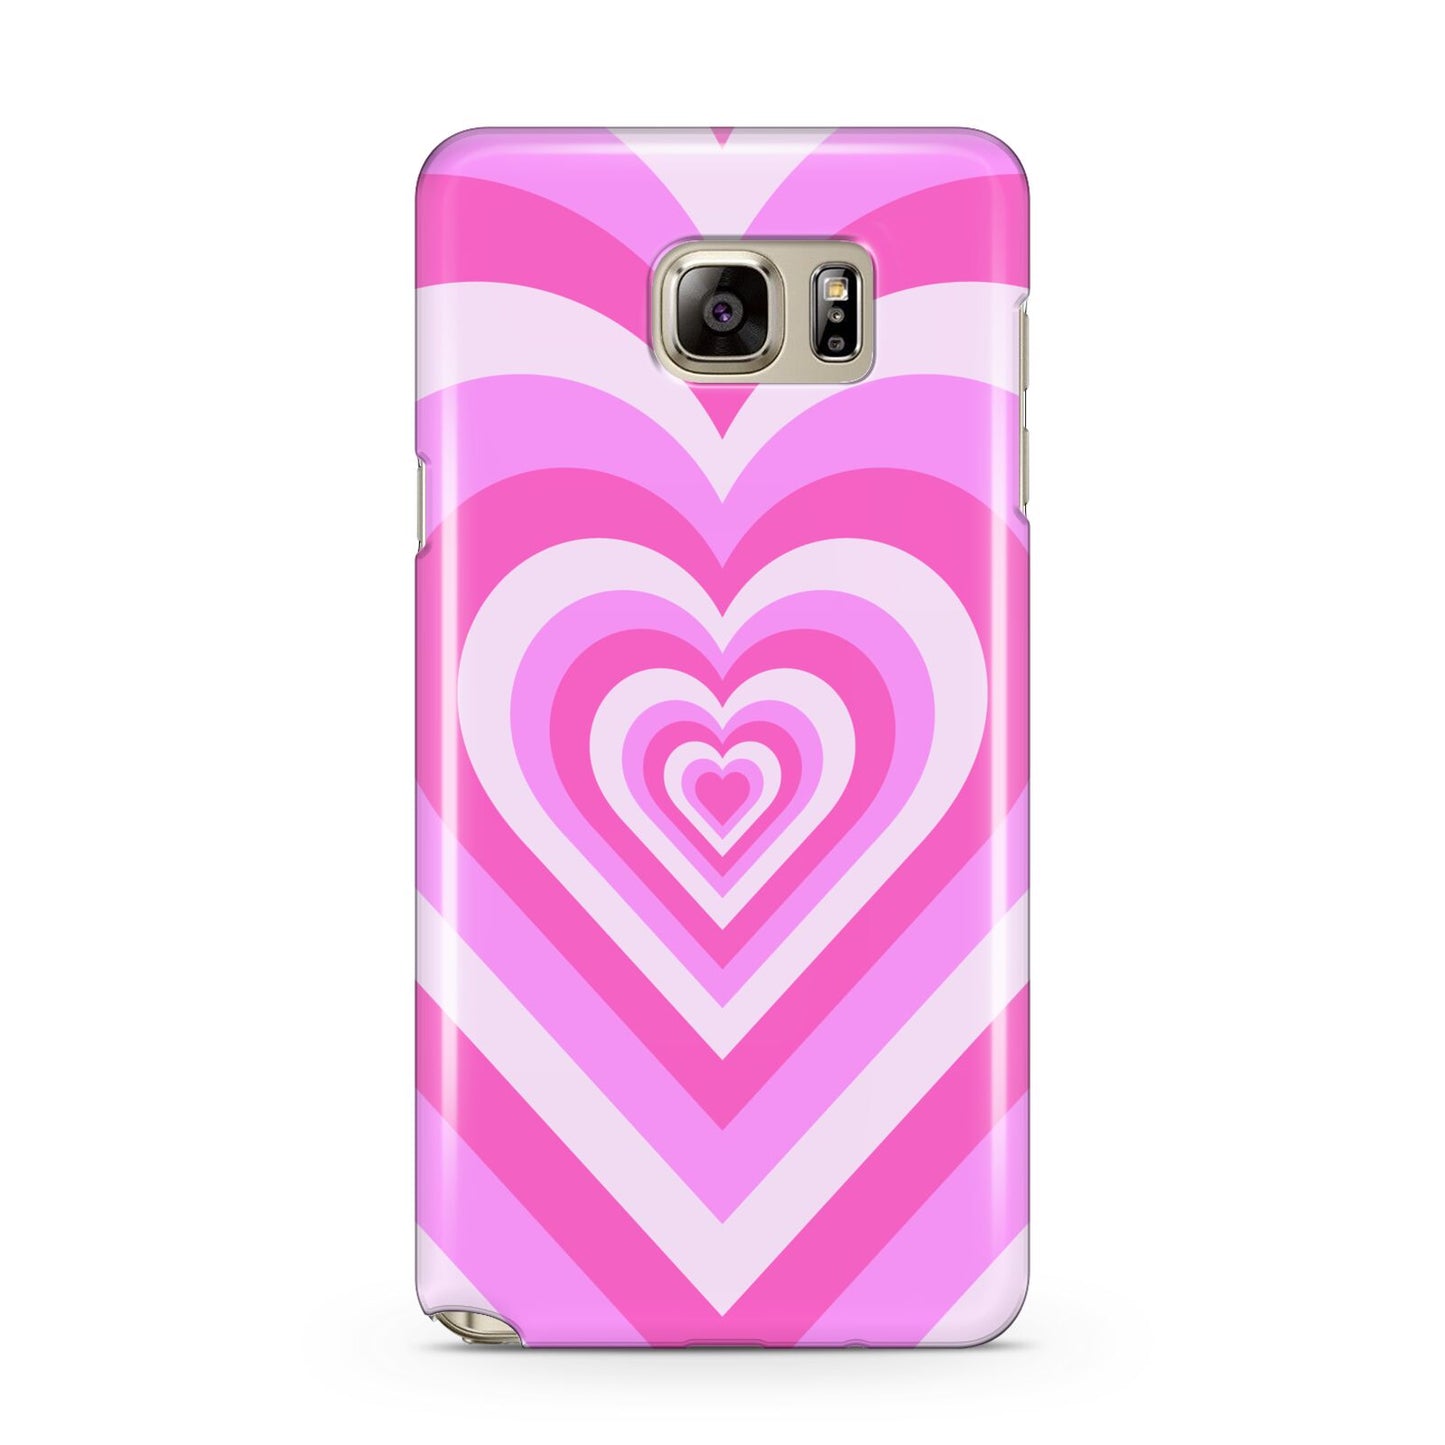 Aesthetic Heart Samsung Galaxy Note 5 Case